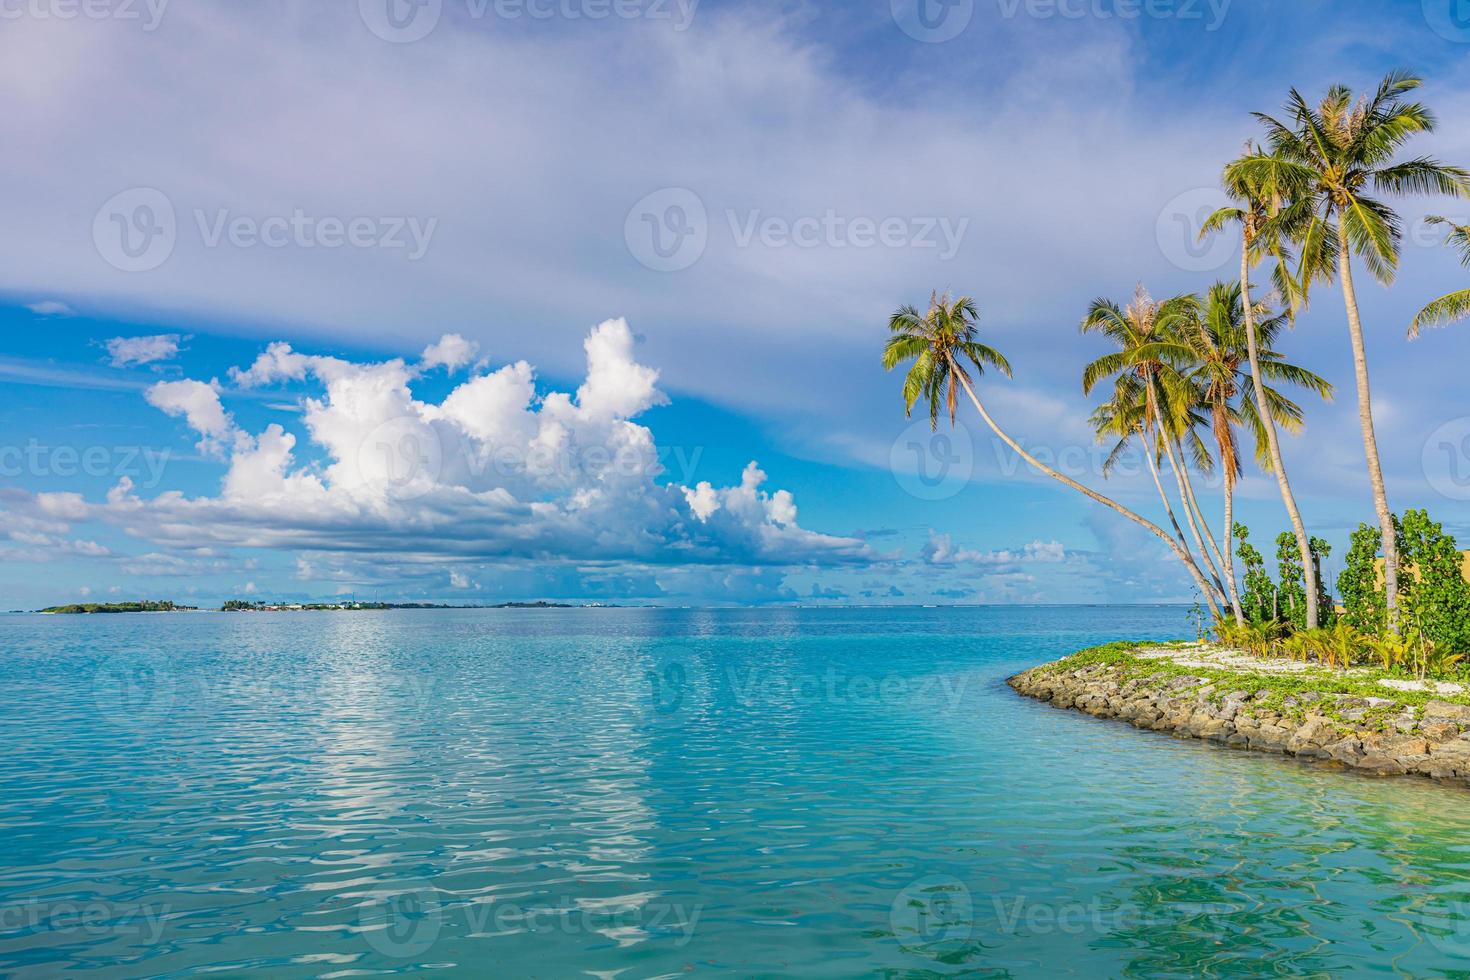 Paradise sunny beach with coco palms and turquoise sea. Summer vacation and tropical beach concept. Breakwater typical waters edge with palm trees and calm sea surface. Miami beach Florida seascape photo